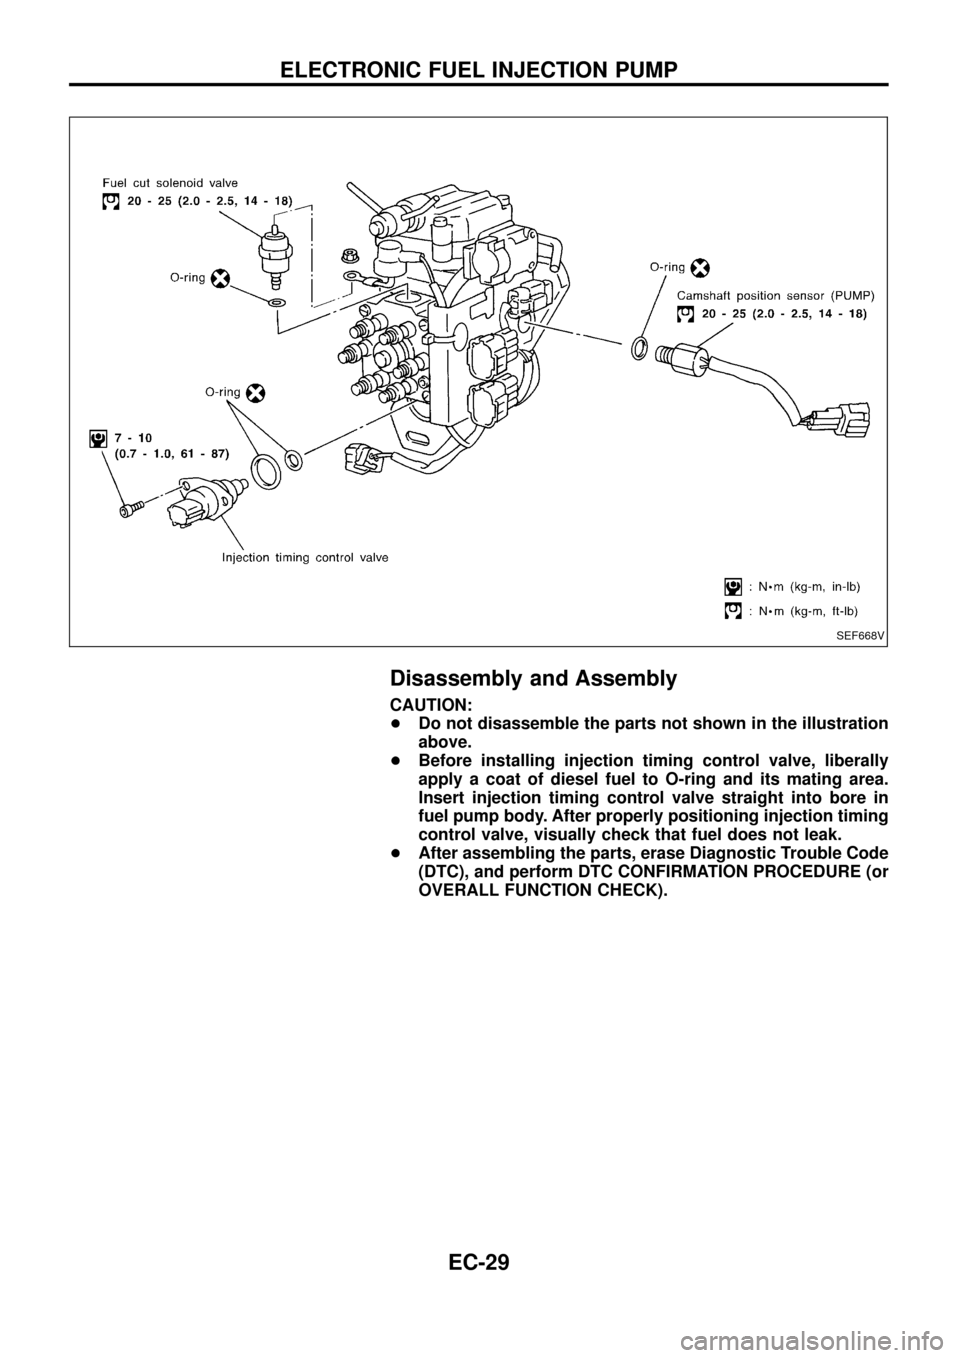 NISSAN PATROL 1998 Y61 / 5.G Engine Control Workshop Manual Disassembly and Assembly
CAUTION:
+Do not disassemble the parts not shown in the illustration
above.
+Before installing injection timing control valve, liberally
apply a coat of diesel fuel to O-ring 